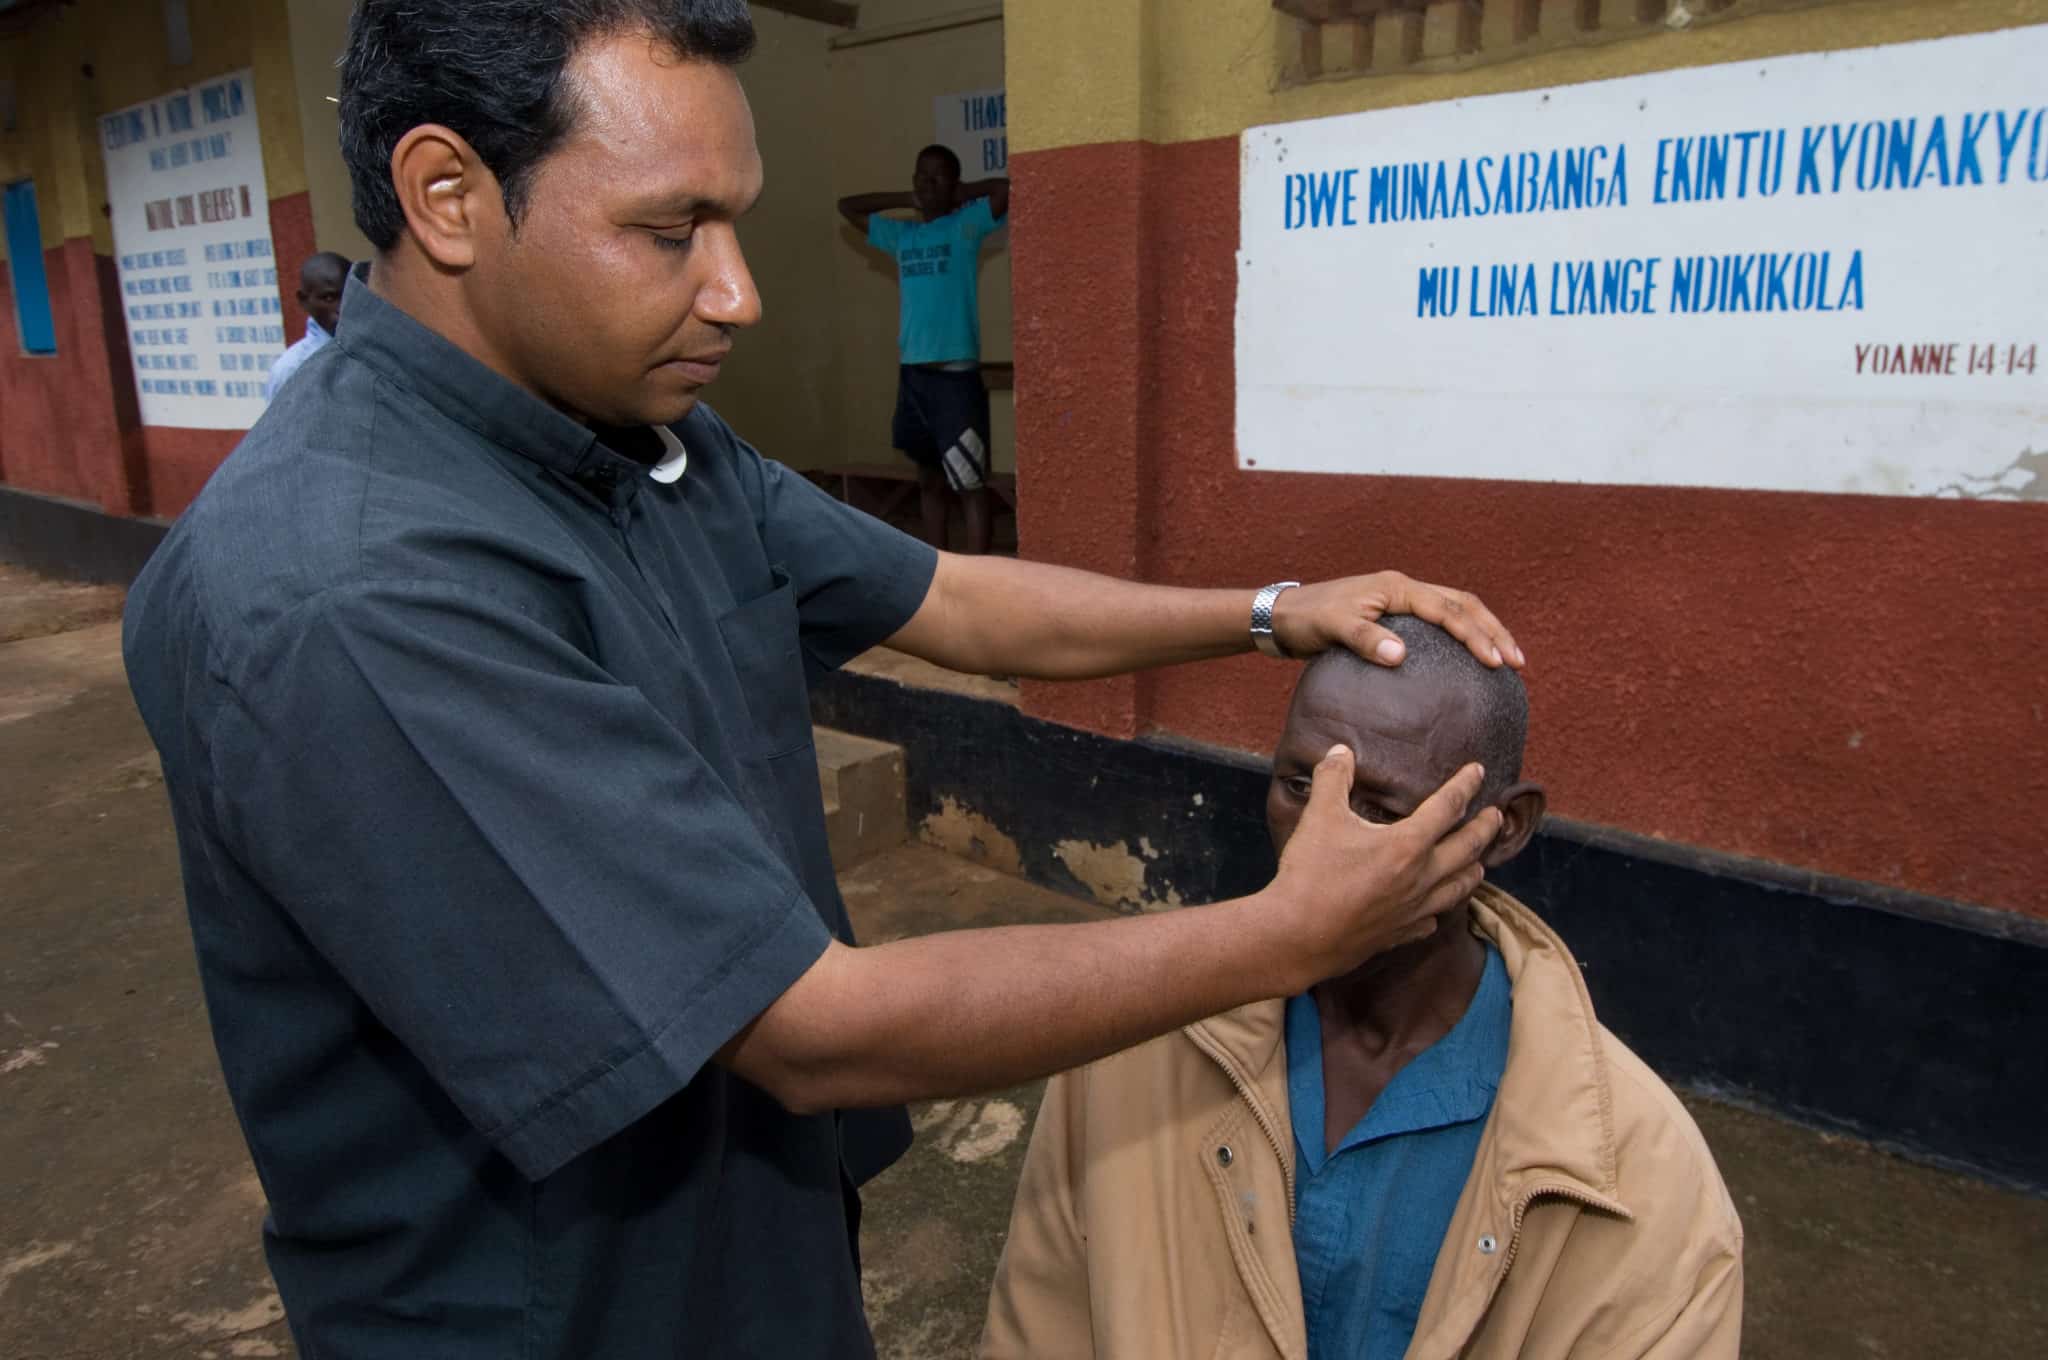 Fr. Matthew Mundackan, who trained in a wide range of holistic healing practices in his native India before coming to Uganda in 1997, opened the St. Clarets Holistic Healing Center one year after his arrival. Here, he performs accu-pressure on a man with high blood pressure.